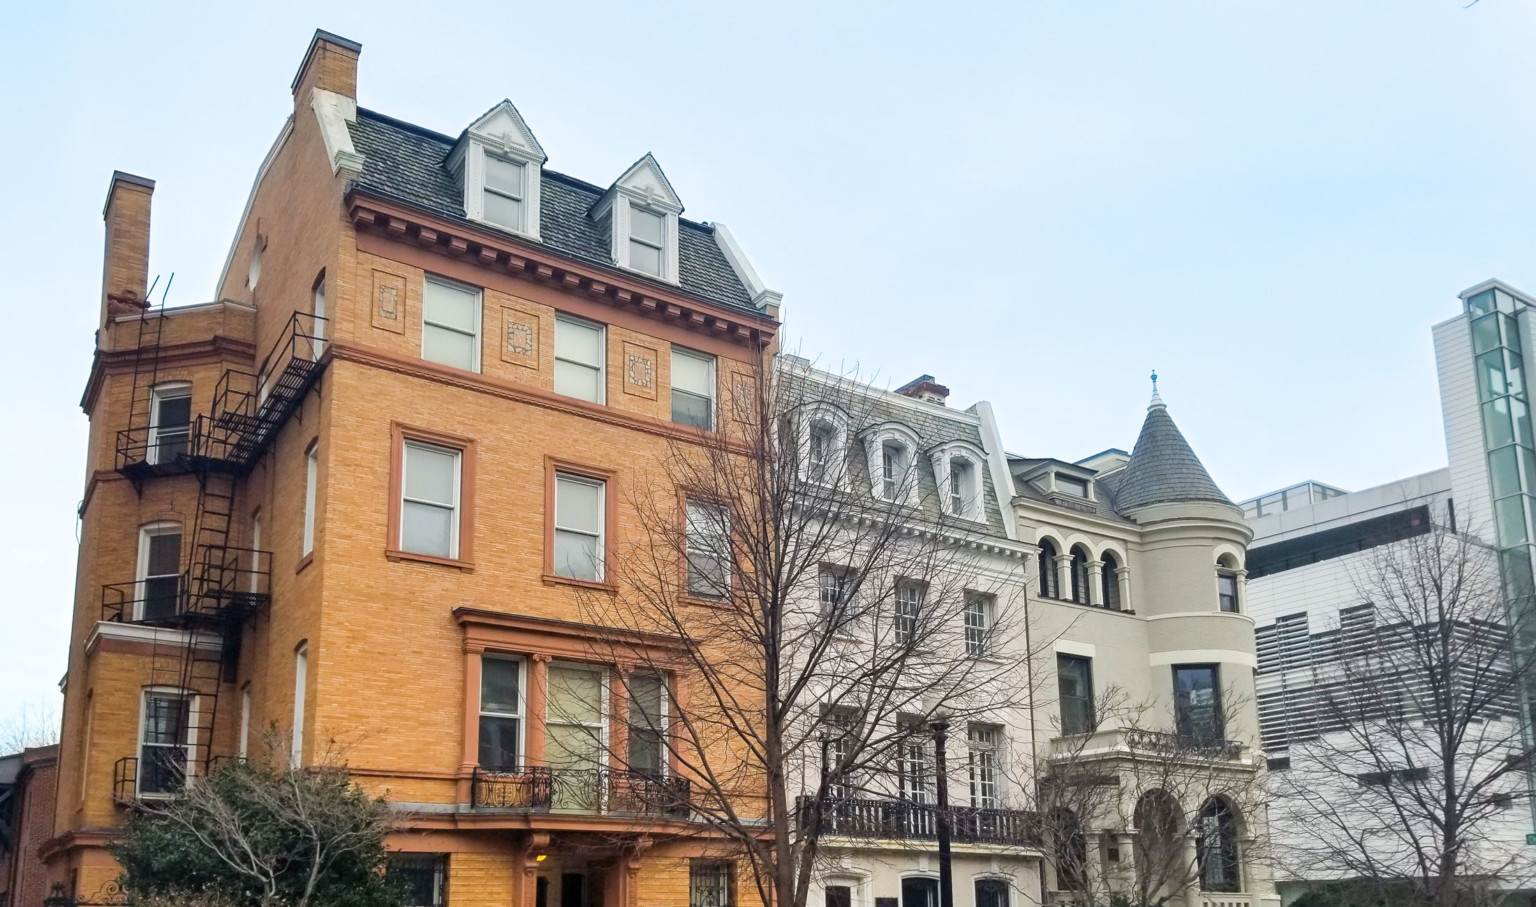 historic row houses in Washington DC, the leftmost being a warm orange revival brick façade. Turret on far right building